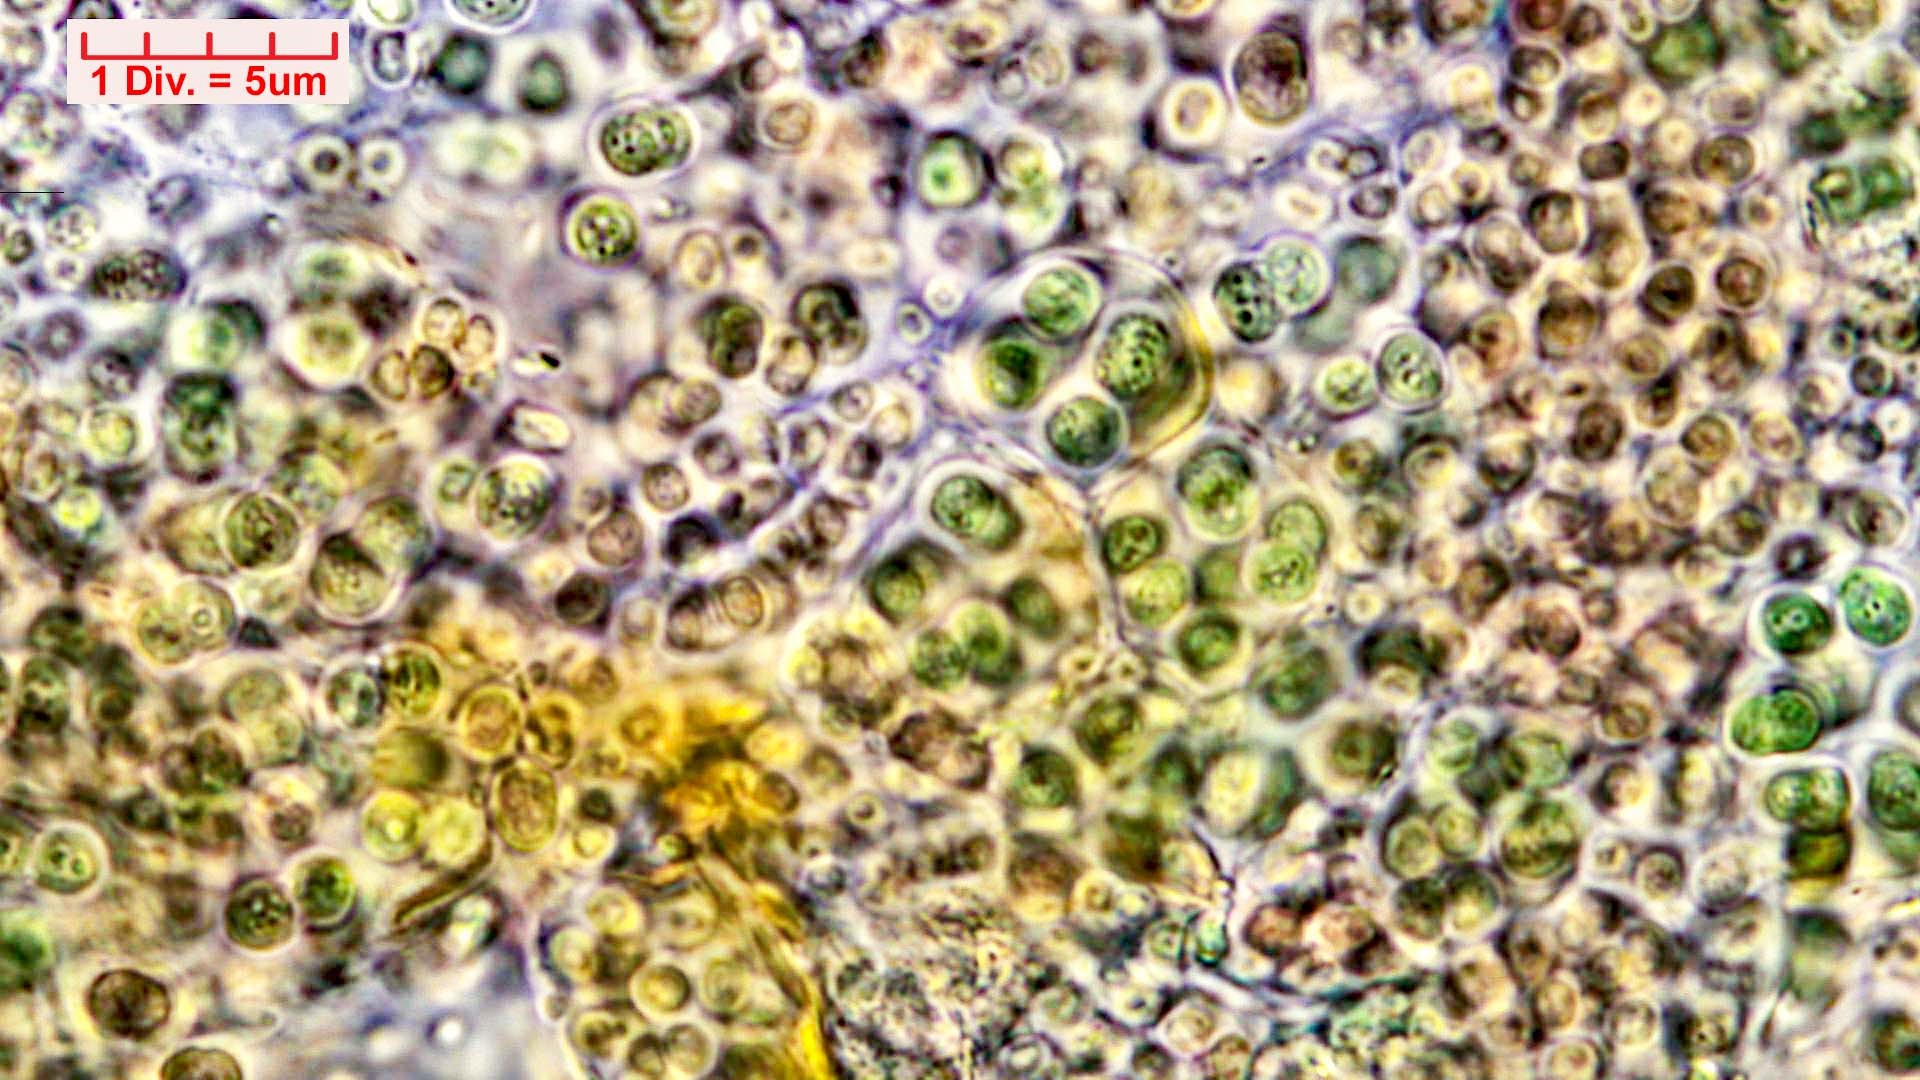 ././Cyanobacteria/Chroococcales/Chroococcaceae/Gloeocapsa/kuetzingiana/gloeocapsa-kuetzingiana-42.jpg